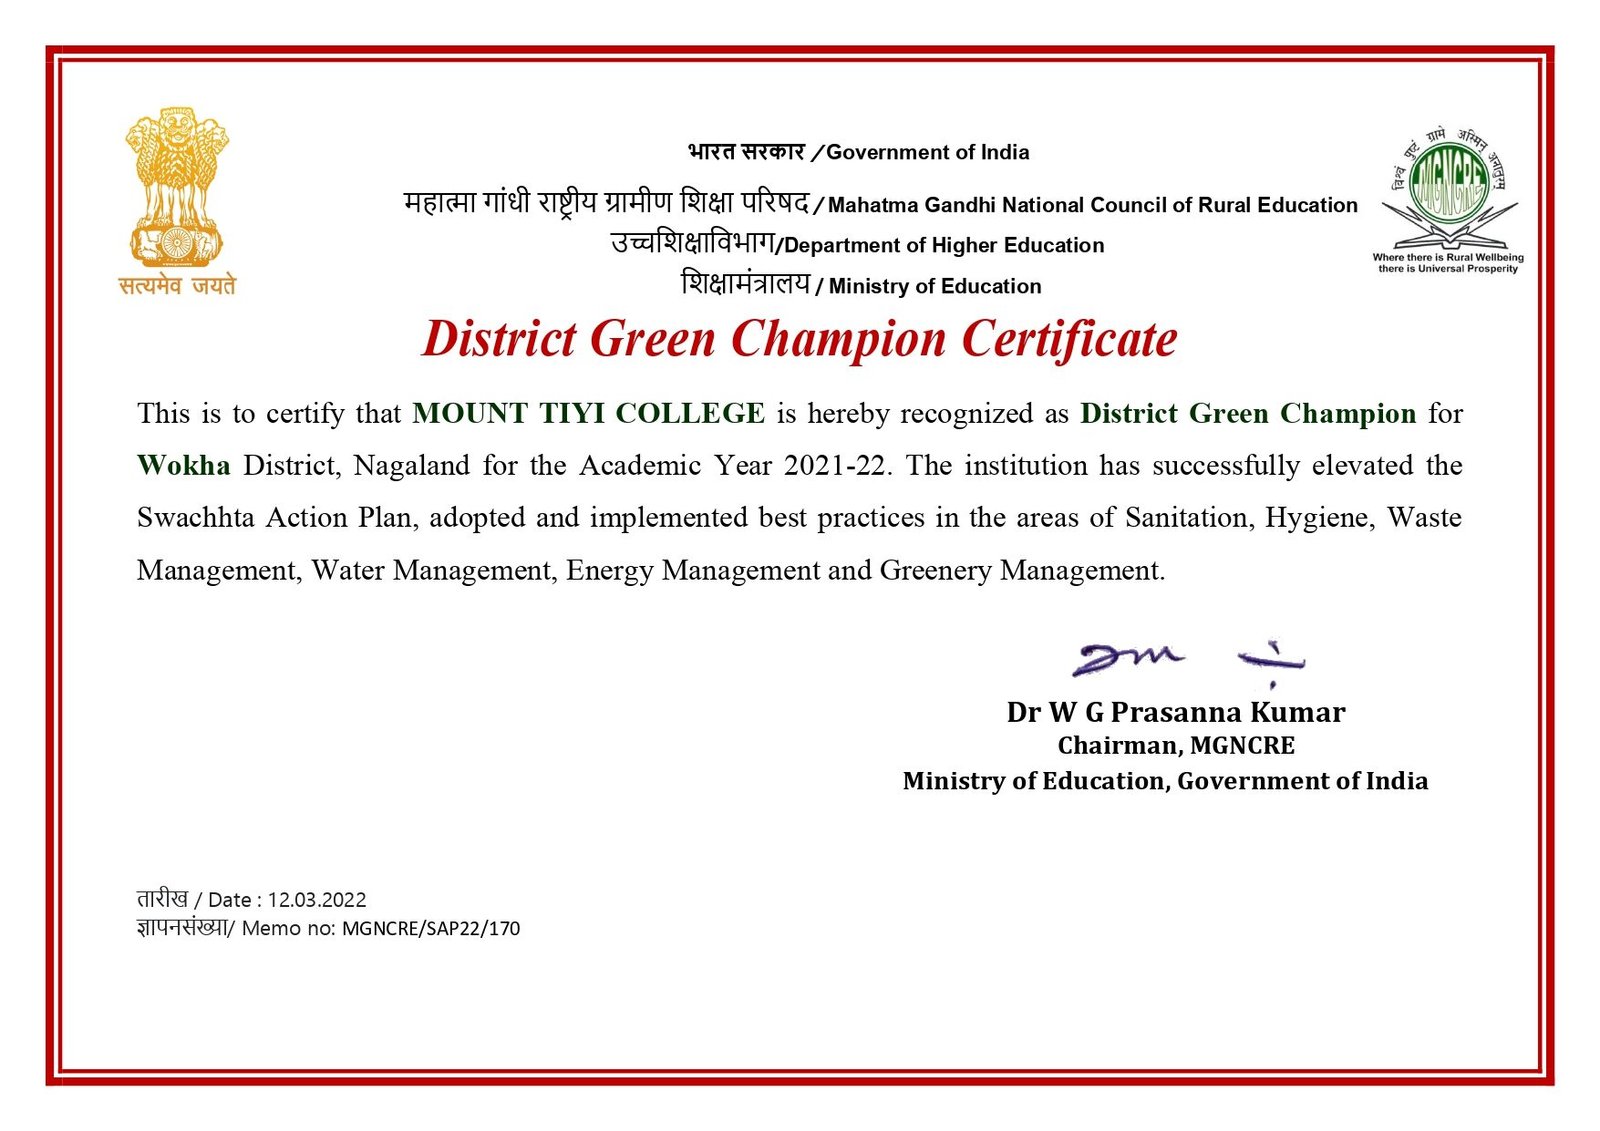 District Green Champion Certificate Awarded by MGNCRE for 2021-2022